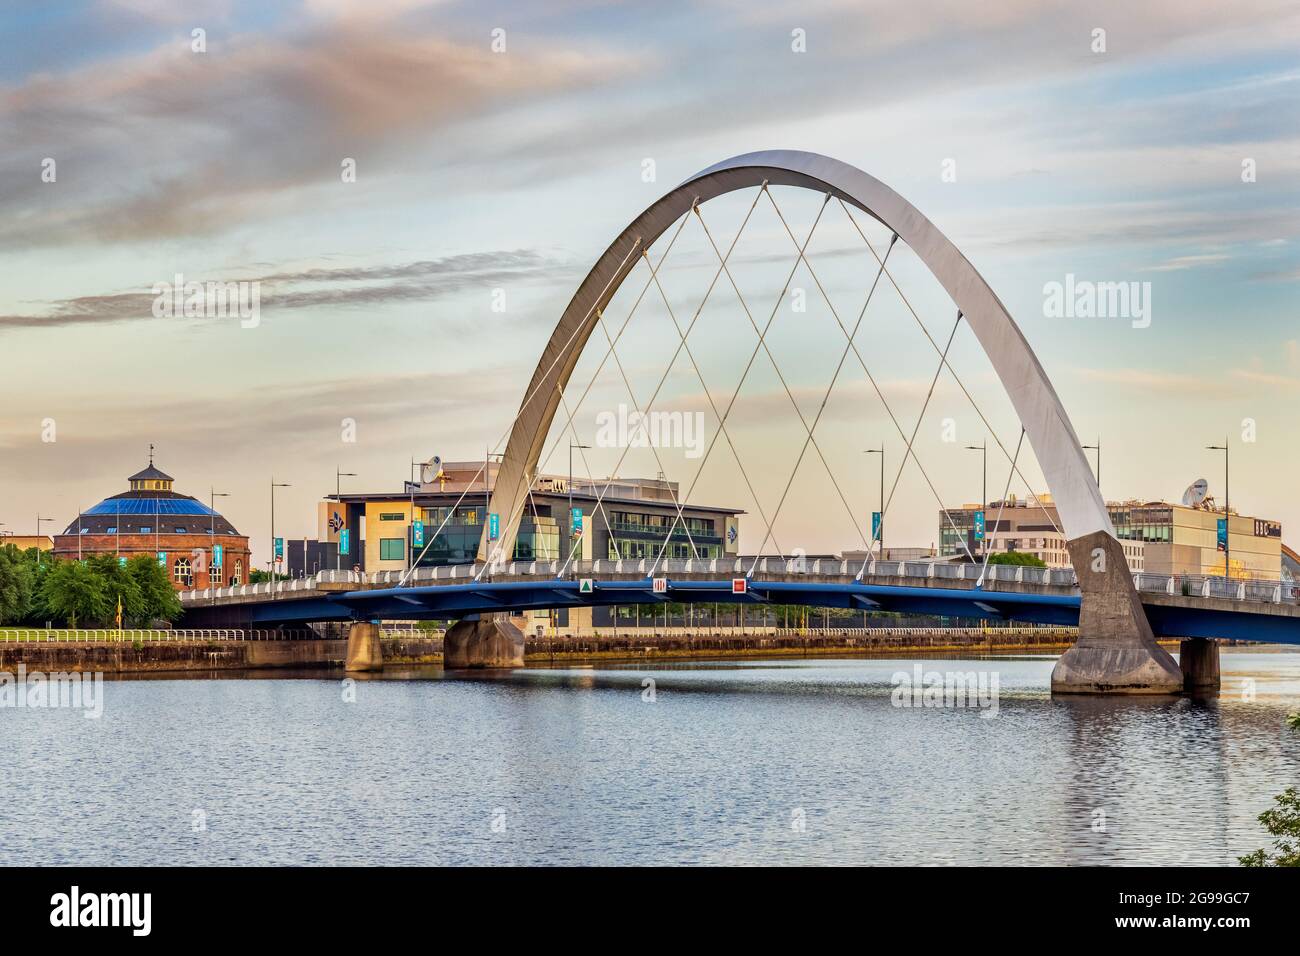 The Squinty Bridge, or real name The Clyde Arc, spanning the river Clyde in Glasgow. Taken just after sunrise. Stock Photo